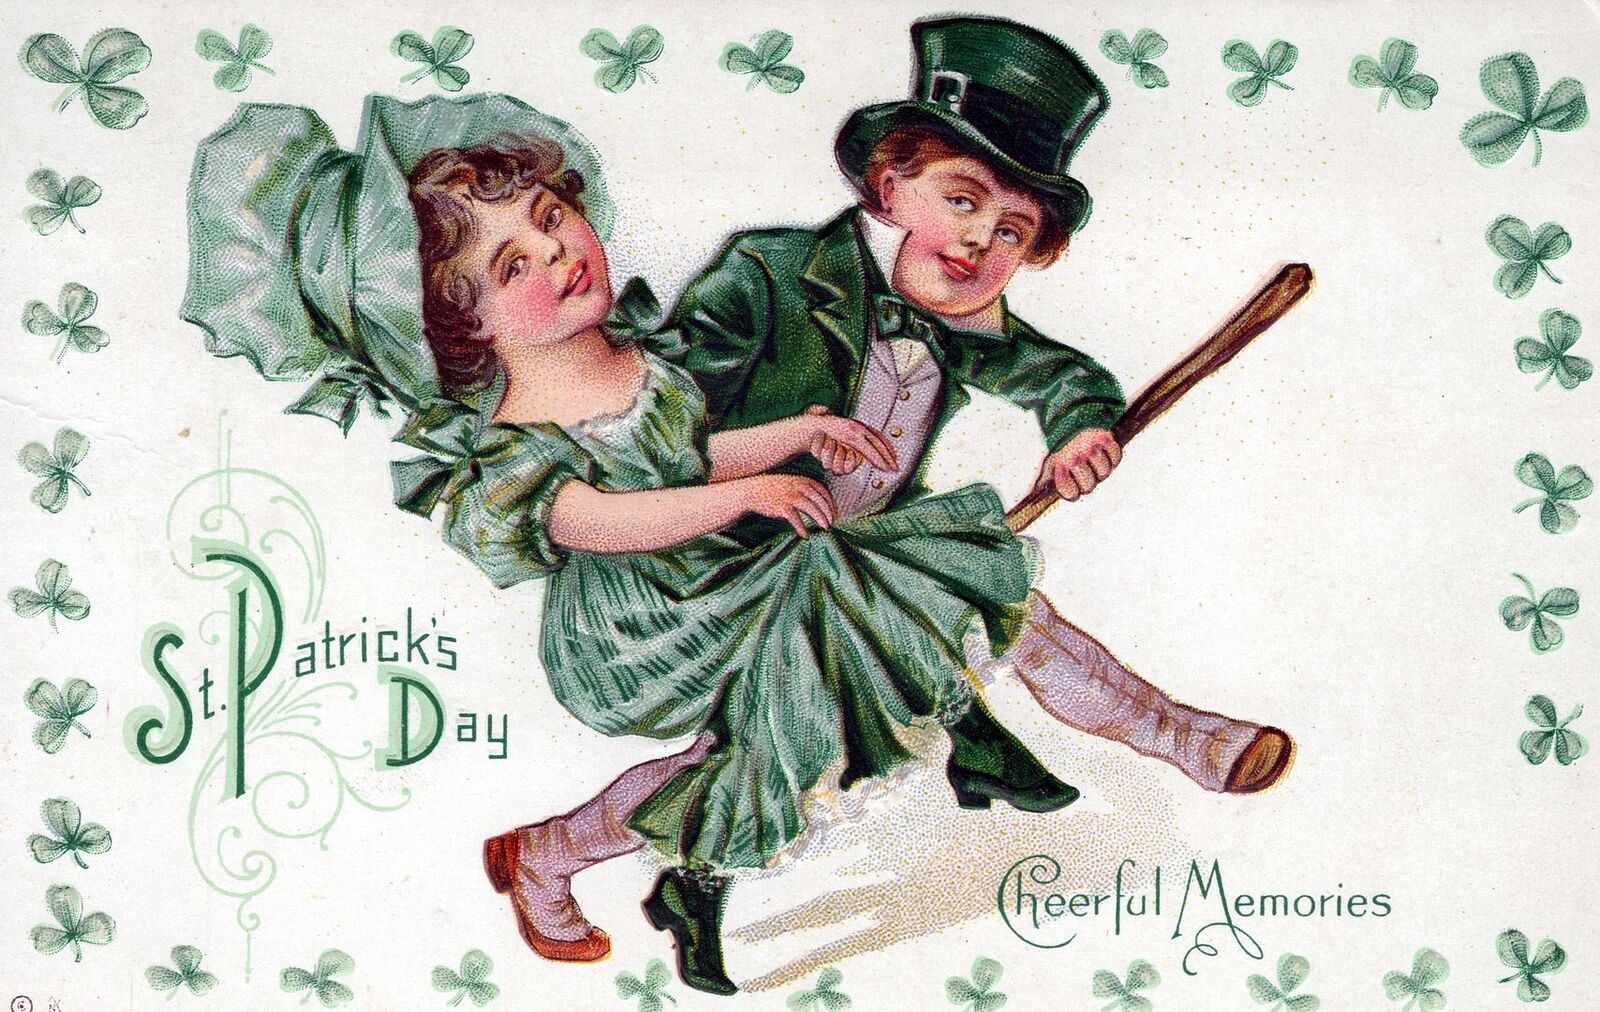 ST. PATRICK'S DAY - Two Children St. Patrick's Day Cheerful Memories Postcard